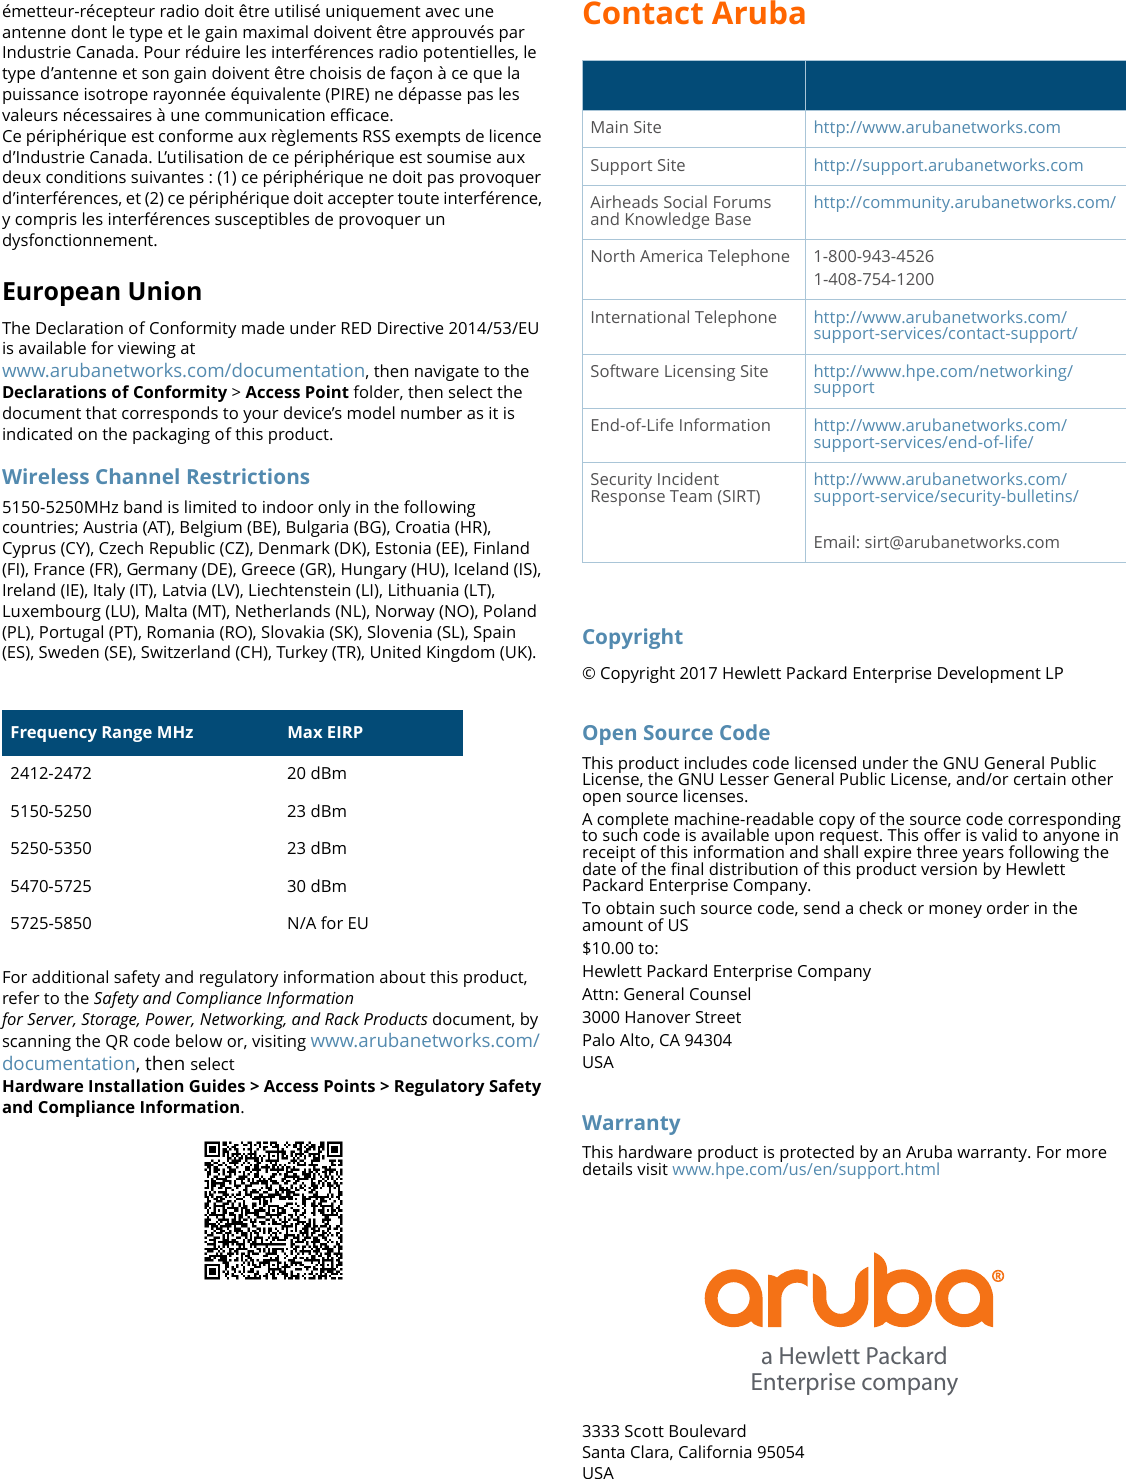 Contact ArubaCopyright© Copyright 2017 Hewlett Packard Enterprise Development LPOpen Source CodeThis product includes code licensed under the GNU General Public License, the GNU Lesser General Public License, and/or certain other open source licenses.A complete machine-readable copy of the source code corresponding to such code is available upon request. This offer is valid to anyone in receipt of this information and shall expire three years following the date of the final distribution of this product version by Hewlett Packard Enterprise Company.To obtain such source code, send a check or money order in the amount of US$10.00 to:Hewlett Packard Enterprise CompanyAttn: General Counsel3000 Hanover StreetPalo Alto, CA 94304USAWarrantyThis hardware product is protected by an Aruba warranty. For more details visit www.hpe.com/us/en/support.html3333 Scott BoulevardSanta Clara, California 95054USAMain Site http://www.arubanetworks.comSupport Site http://support.arubanetworks.comAirheads Social Forums and Knowledge Base http://community.arubanetworks.com/North America Telephone 1-800-943-45261-408-754-1200International Telephone http://www.arubanetworks.com/support-services/contact-support/Software Licensing Site http://www.hpe.com/networking/supportEnd-of-Life Information http://www.arubanetworks.com/support-services/end-of-life/Security Incident Response Team (SIRT)http://www.arubanetworks.com/support-service/security-bulletins/Email: sirt@arubanetworks.coma Hewlett PackardEnterprise companyémetteur-récepteur radio doit être utilisé uniquement avec une antenne dont le type et le gain maximal doivent être approuvés par Industrie Canada. Pour réduire les interférences radio potentielles, le type d’antenne et son gain doivent être choisis de façon à ce que la puissance isotrope rayonnée équivalente (PIRE) ne dépasse pas les valeurs nécessaires à une communication efficace. Ce périphérique est conforme aux règlements RSS exempts de licence d’Industrie Canada. L’utilisation de ce périphérique est soumise aux deux conditions suivantes : (1) ce périphérique ne doit pas provoquer d’interférences, et (2) ce périphérique doit accepter toute interférence, y compris les interférences susceptibles de provoquer un dysfonctionnement.European UnionThe Declaration of Conformity made under RED Directive 2014/53/EU is available for viewing at www.arubanetworks.com/documentation, then navigate to the Declarations of Conformity &gt; Access Point folder, then select the document that corresponds to your device’s model number as it is indicated on the packaging of this product.Wireless Channel Restrictions5150-5250MHz band is limited to indoor only in the following countries; Austria (AT), Belgium (BE), Bulgaria (BG), Croatia (HR), Cyprus (CY), Czech Republic (CZ), Denmark (DK), Estonia (EE), Finland (FI), France (FR), Germany (DE), Greece (GR), Hungary (HU), Iceland (IS), Ireland (IE), Italy (IT), Latvia (LV), Liechtenstein (LI), Lithuania (LT), Luxembourg (LU), Malta (MT), Netherlands (NL), Norway (NO), Poland (PL), Portugal (PT), Romania (RO), Slovakia (SK), Slovenia (SL), Spain (ES), Sweden (SE), Switzerland (CH), Turkey (TR), United Kingdom (UK).For additional safety and regulatory information about this product, refer to the Safety and Compliance Informationfor Server, Storage, Power, Networking, and Rack Products document, by scanning the QR code below or, visiting www.arubanetworks.com/documentation, then selectHardware Installation Guides &gt; Access Points &gt; Regulatory Safety and Compliance Information. Frequency Range MHz Max EIRP2412-2472 20 dBm5150-5250 23 dBm5250-5350 23 dBm5470-5725 30 dBm5725-5850 N/A for EU